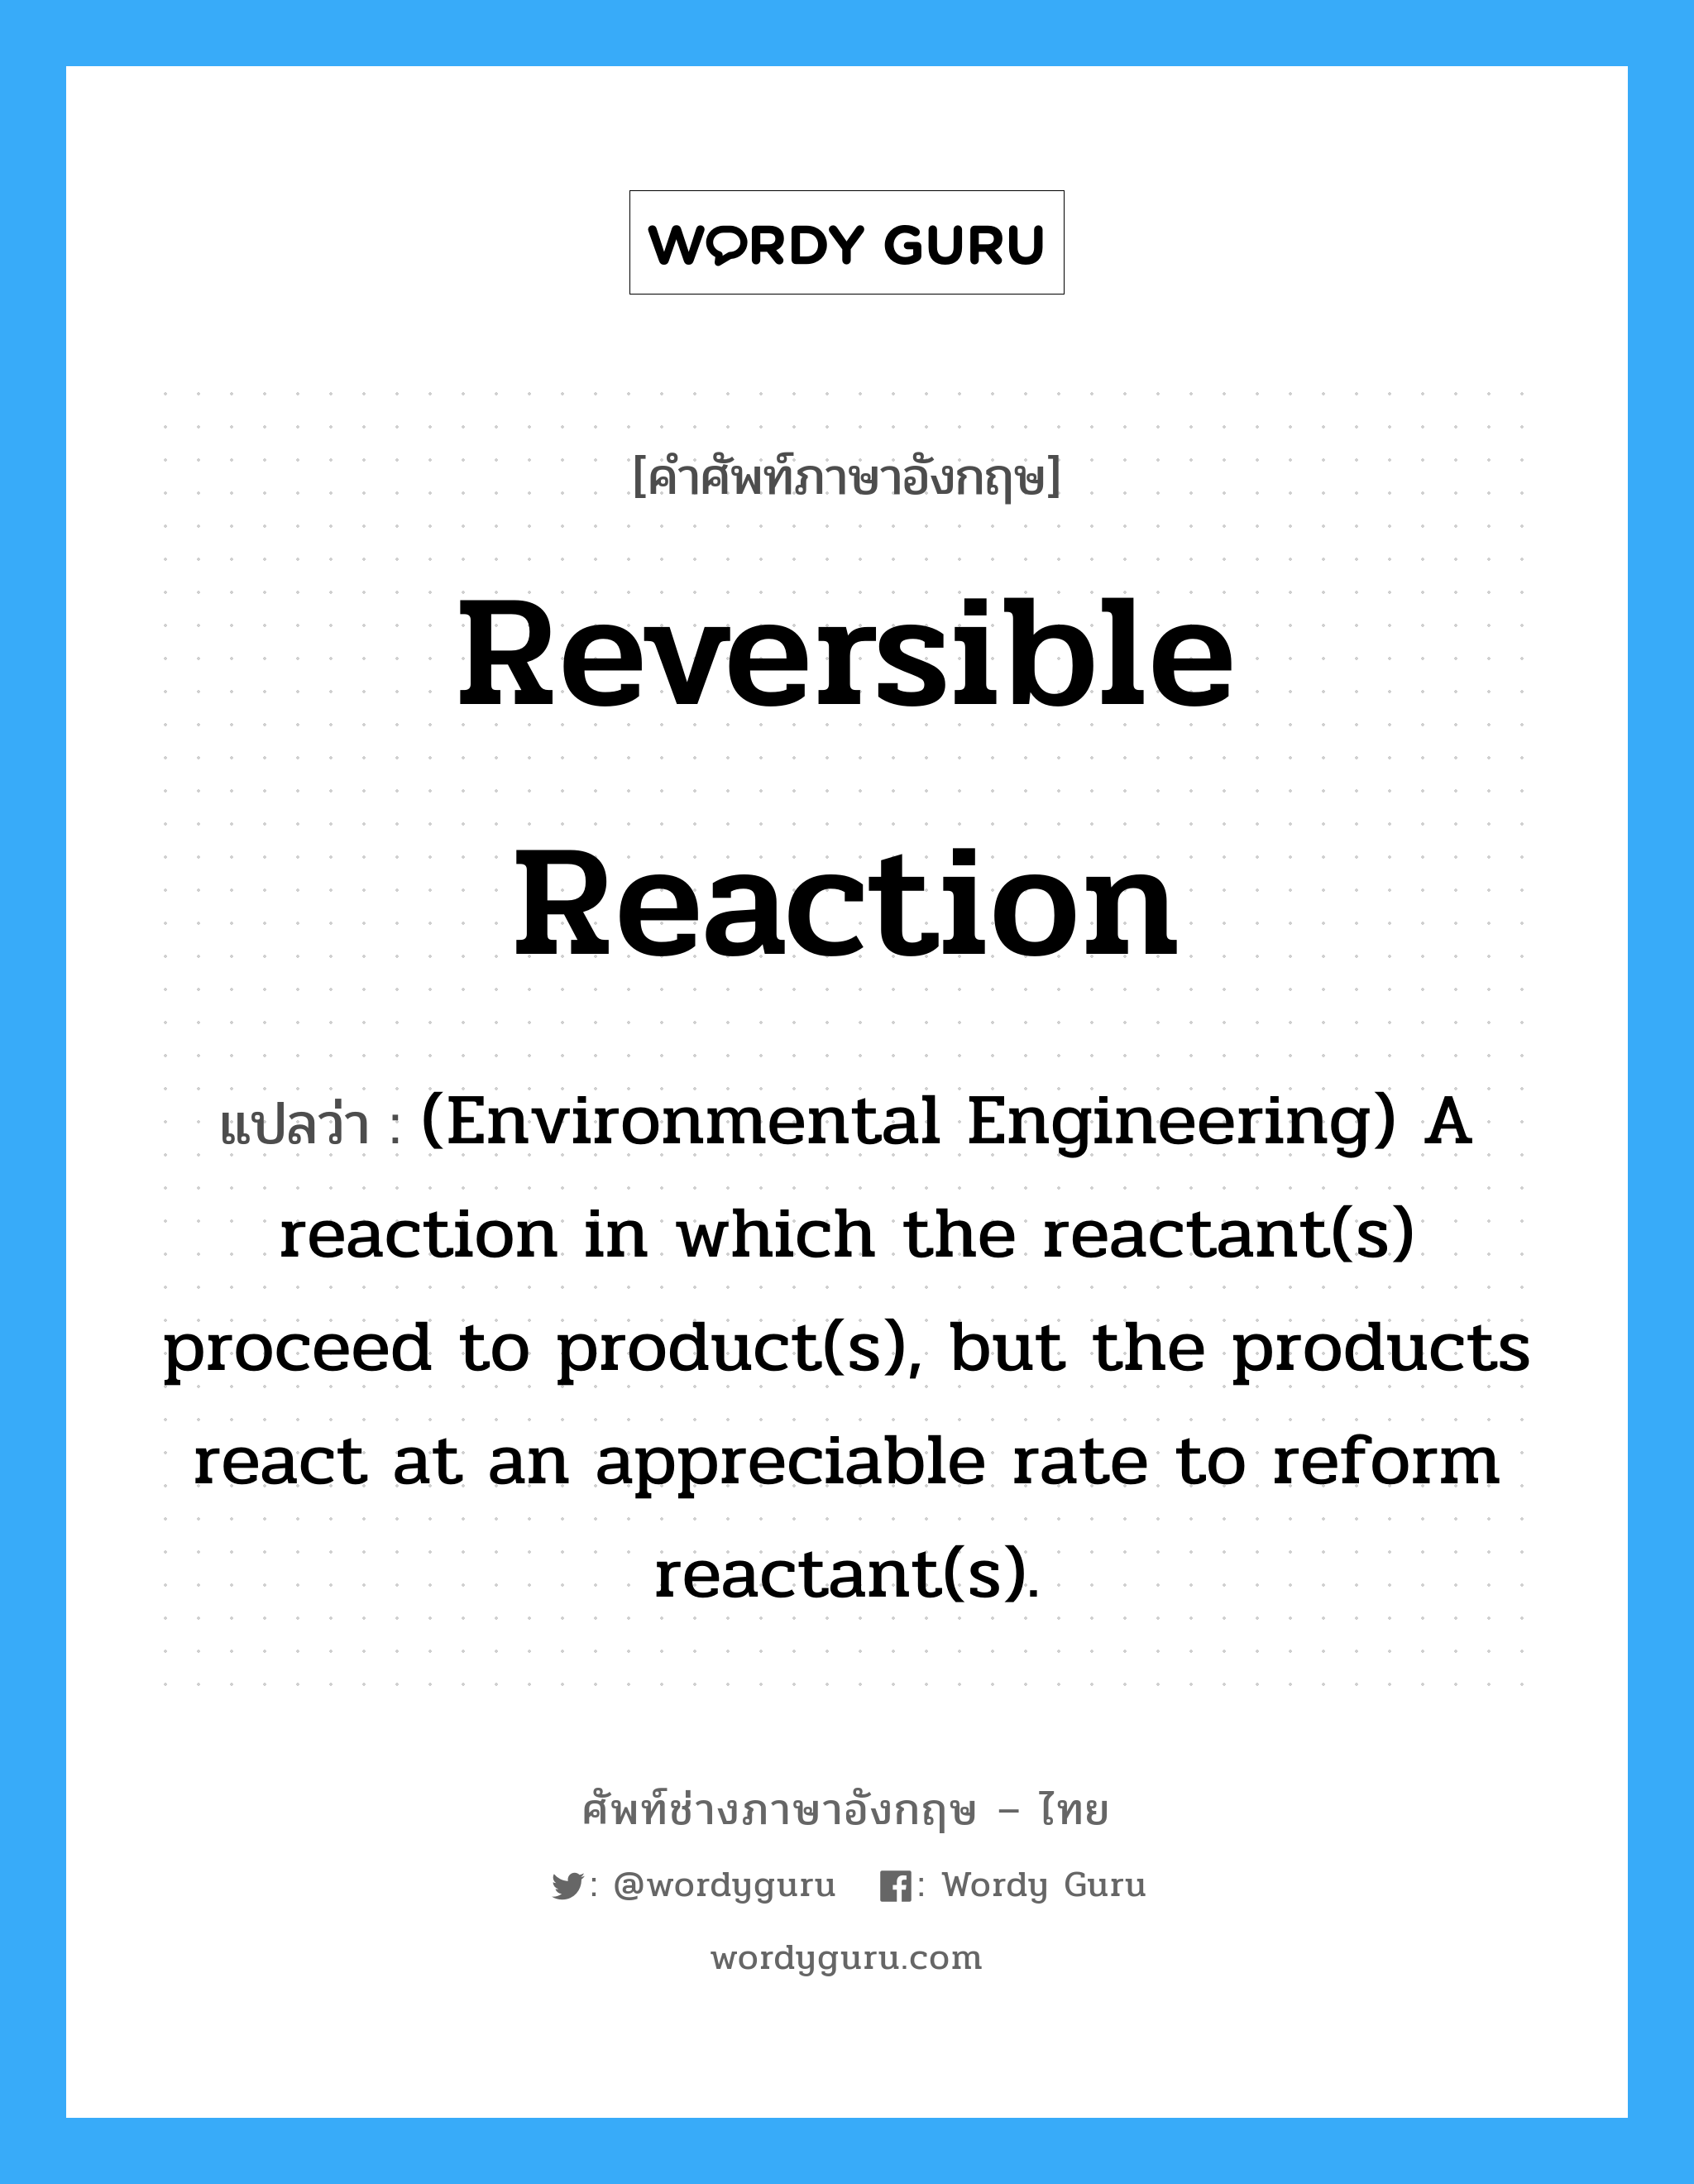 (Environmental Engineering) A reaction in which the reactant(s) proceed to product(s), but the products react at an appreciable rate to reform reactant(s). ภาษาอังกฤษ?, คำศัพท์ช่างภาษาอังกฤษ - ไทย (Environmental Engineering) A reaction in which the reactant(s) proceed to product(s), but the products react at an appreciable rate to reform reactant(s). คำศัพท์ภาษาอังกฤษ (Environmental Engineering) A reaction in which the reactant(s) proceed to product(s), but the products react at an appreciable rate to reform reactant(s). แปลว่า Reversible reaction